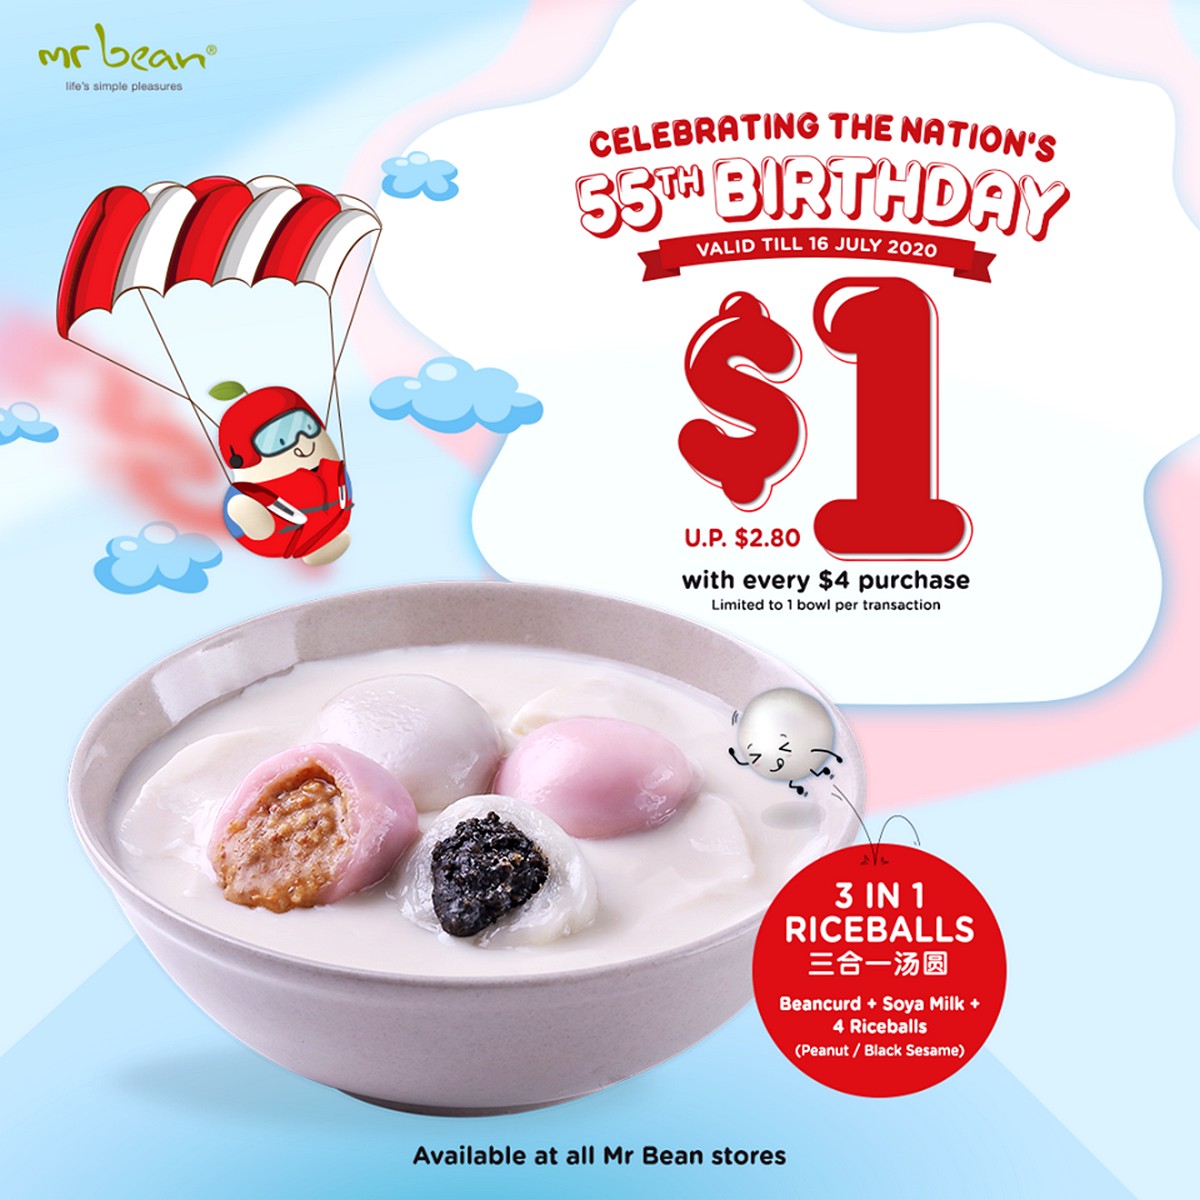 Mr-Bean-3-in-1-RiceBalls-for-1-dollar-only-Promotion-2020-Singapore-Dessert-SNacks-Offers-Foodie Now till 16 July 2020: Mr Bean $1 Riceballs Promotion